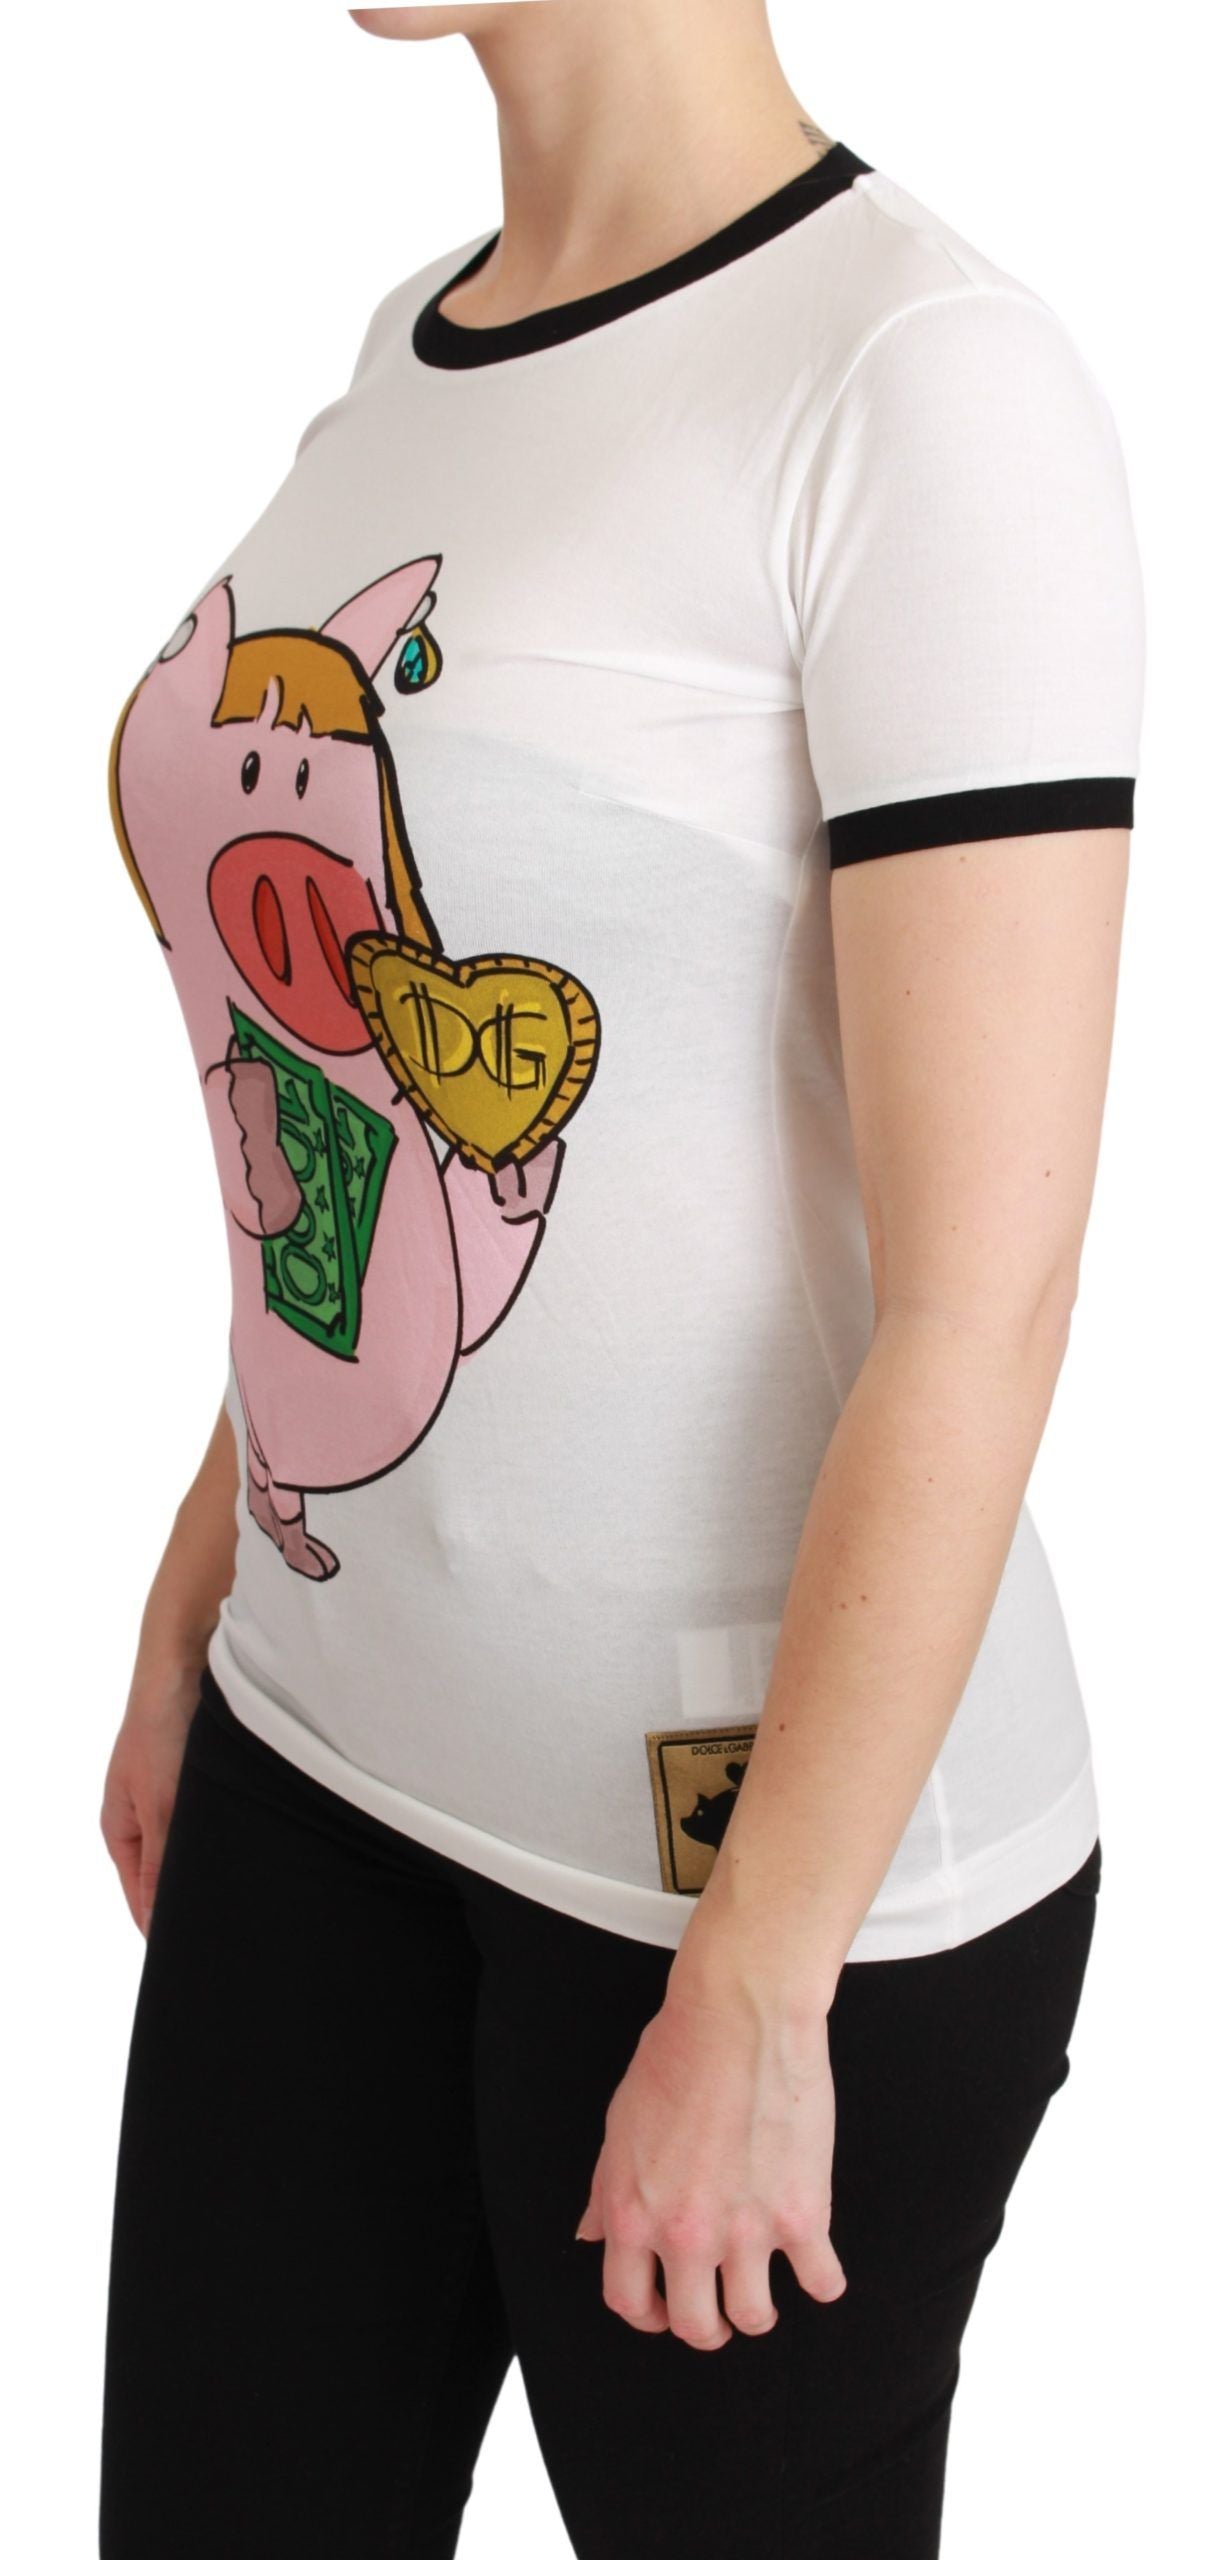 Dolce & Gabbana White YEAR OF THE PIG Top Cotton T-shirt - Gio Beverly Hills